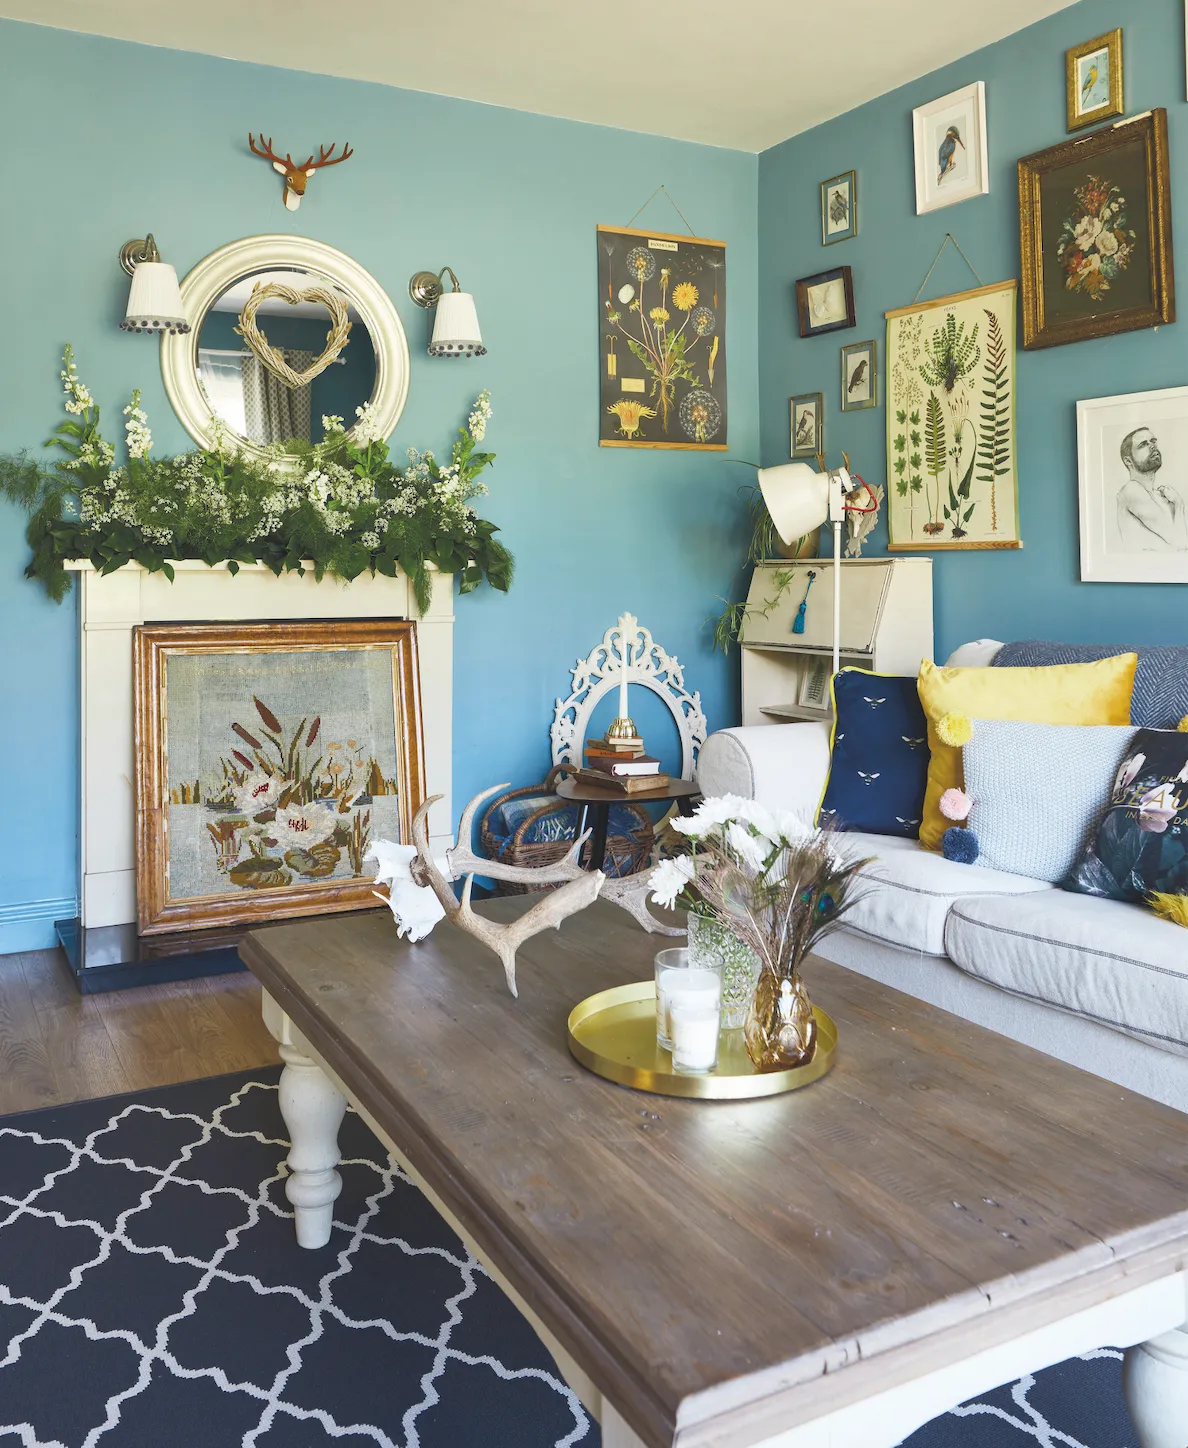 Home makeover: 'We used colour to make the ordinary beautiful'